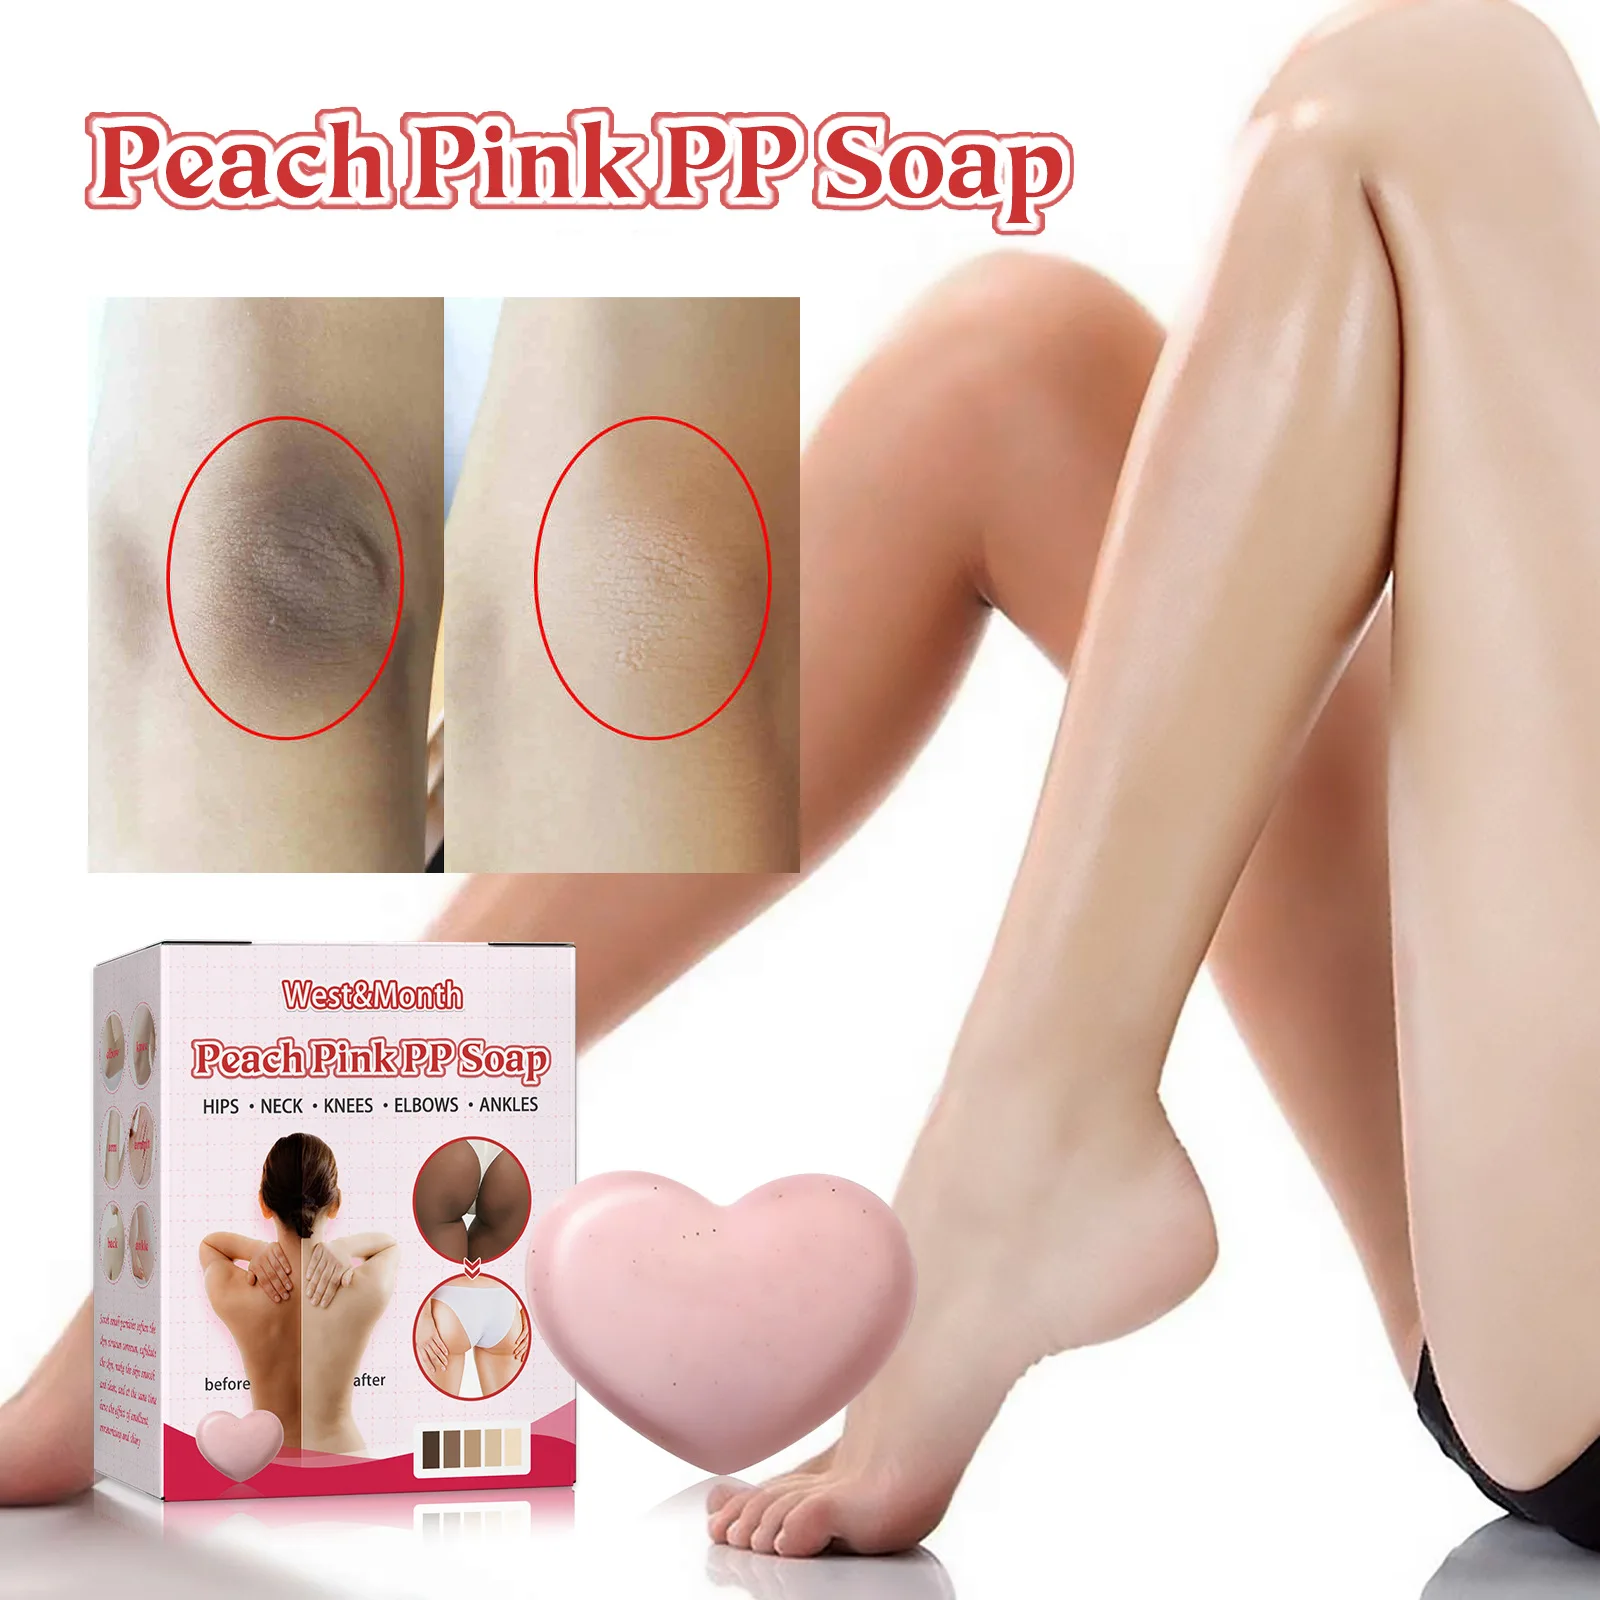 

West&Month peach pink tender pp soap private bath body cleansing beauty soap to dilute melanin